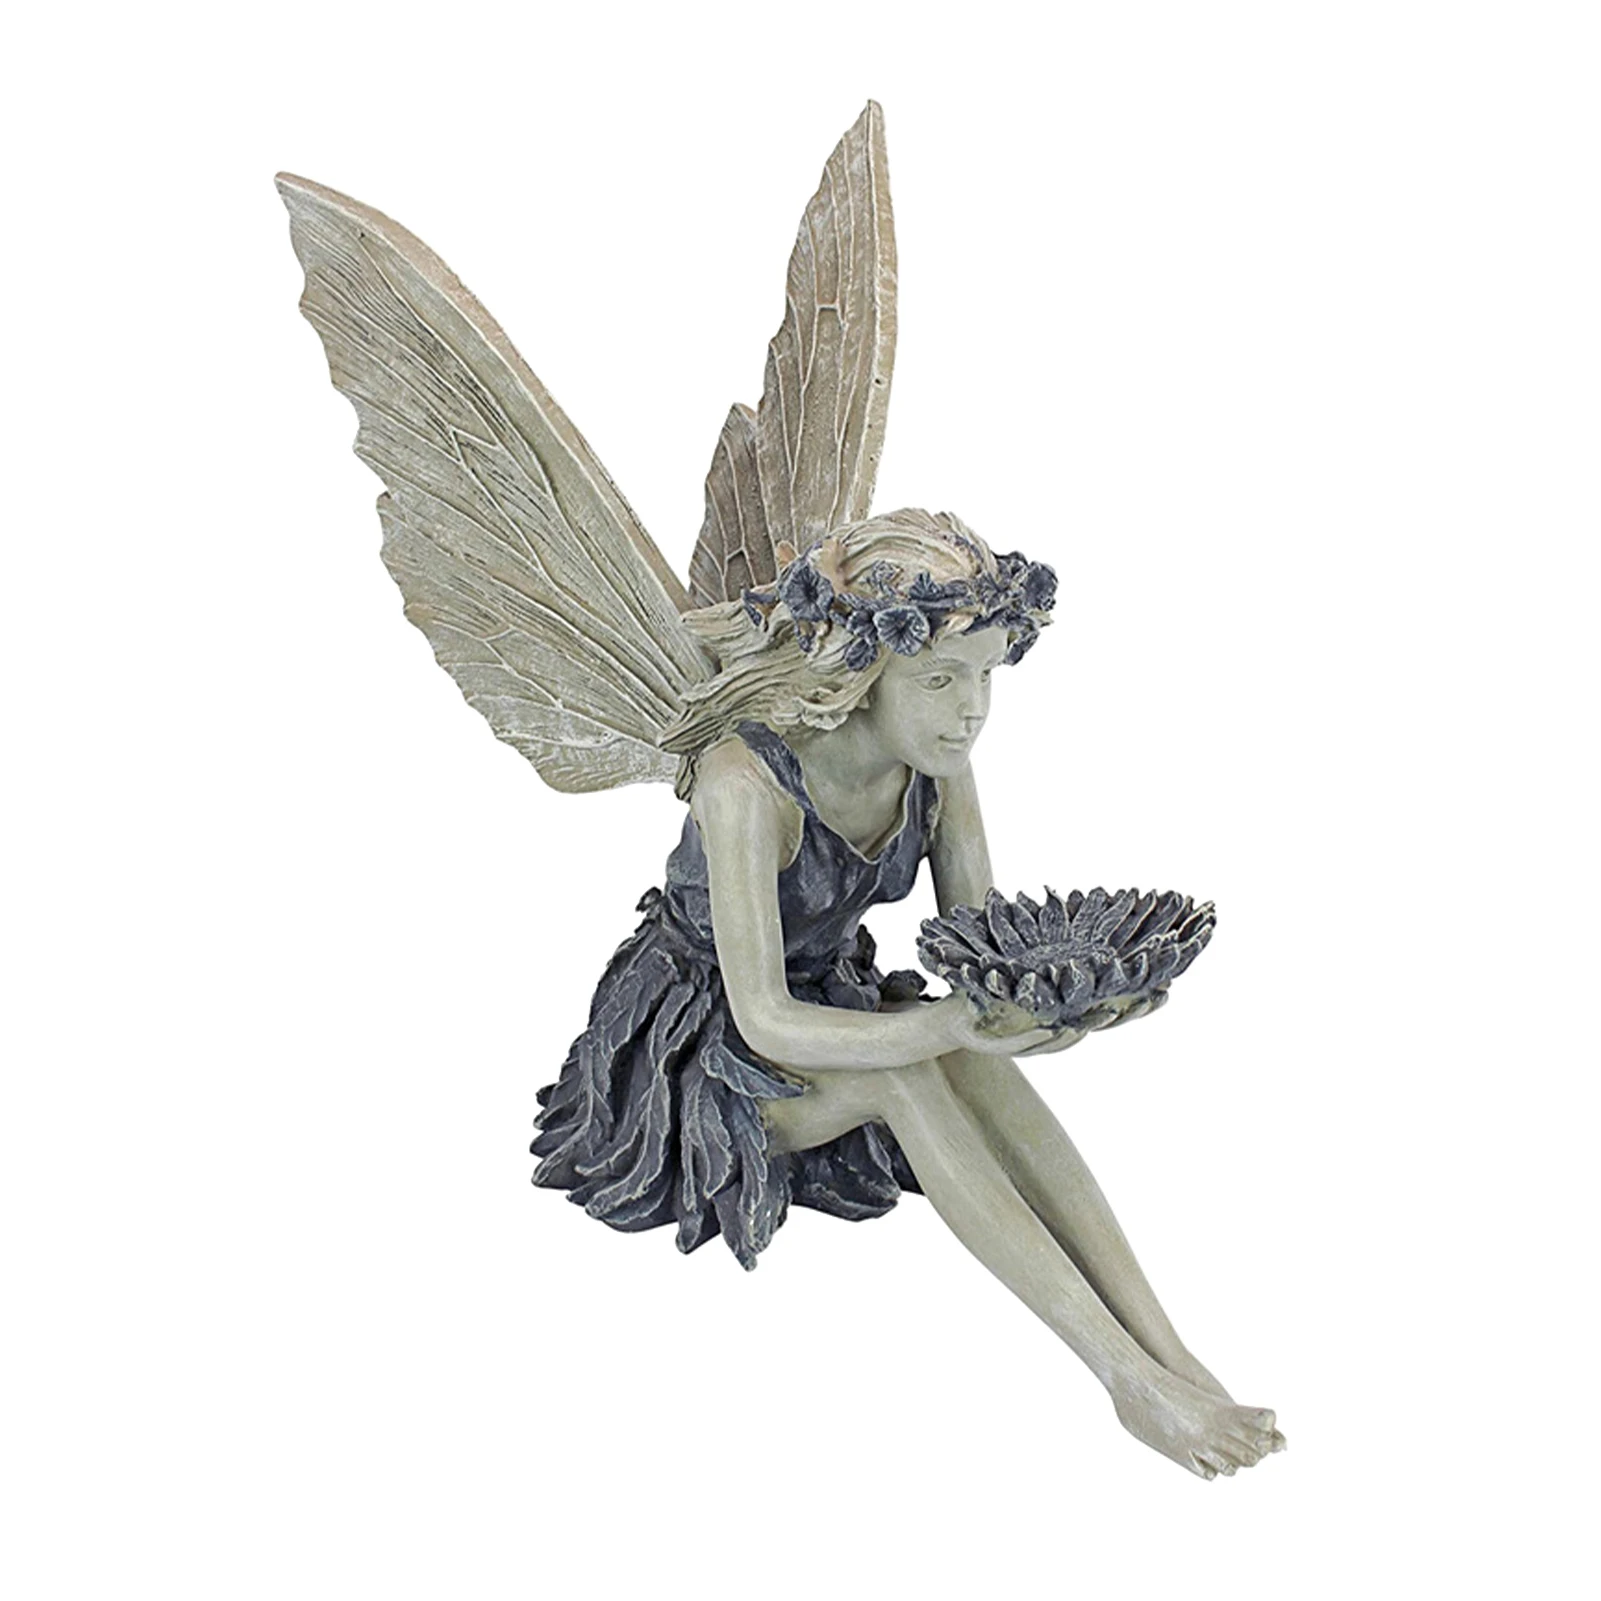 

Park Home Landscaping Lawn Gift Indoor Outdoor Garden Ornament With Wings Patio Resin Craft Sitting Fairy Statue Sculpture Yard